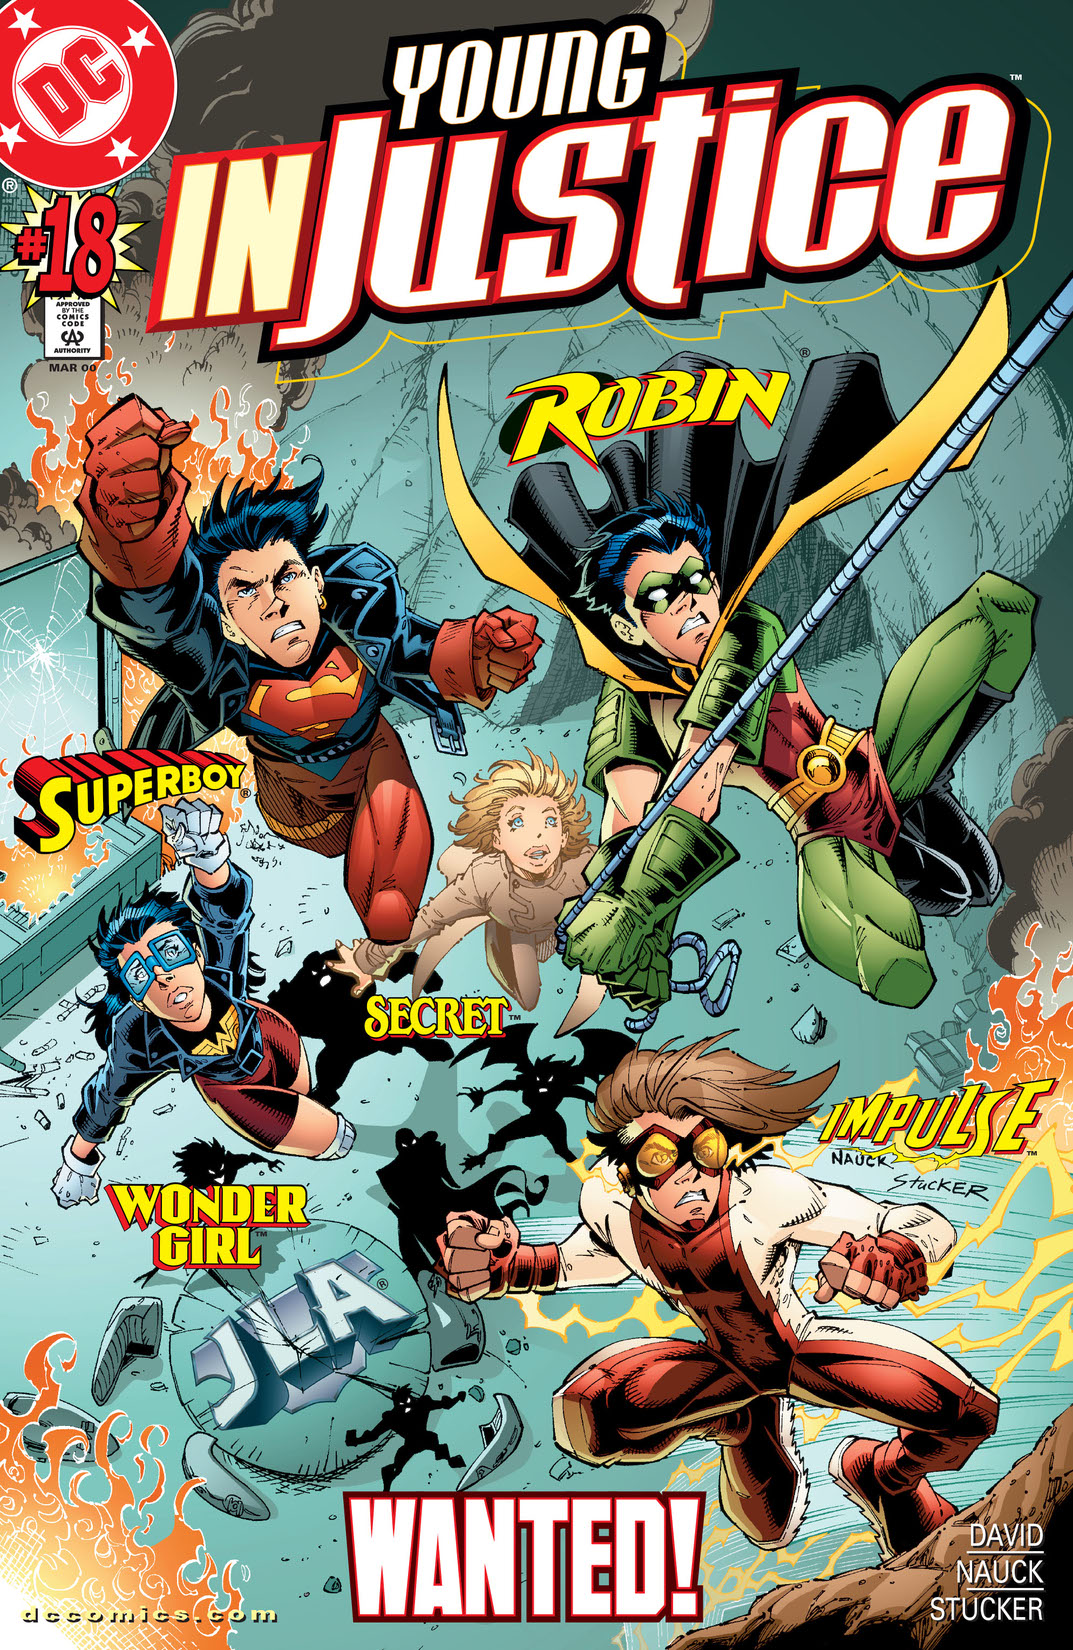 Young Justice (1998-) #18 preview images